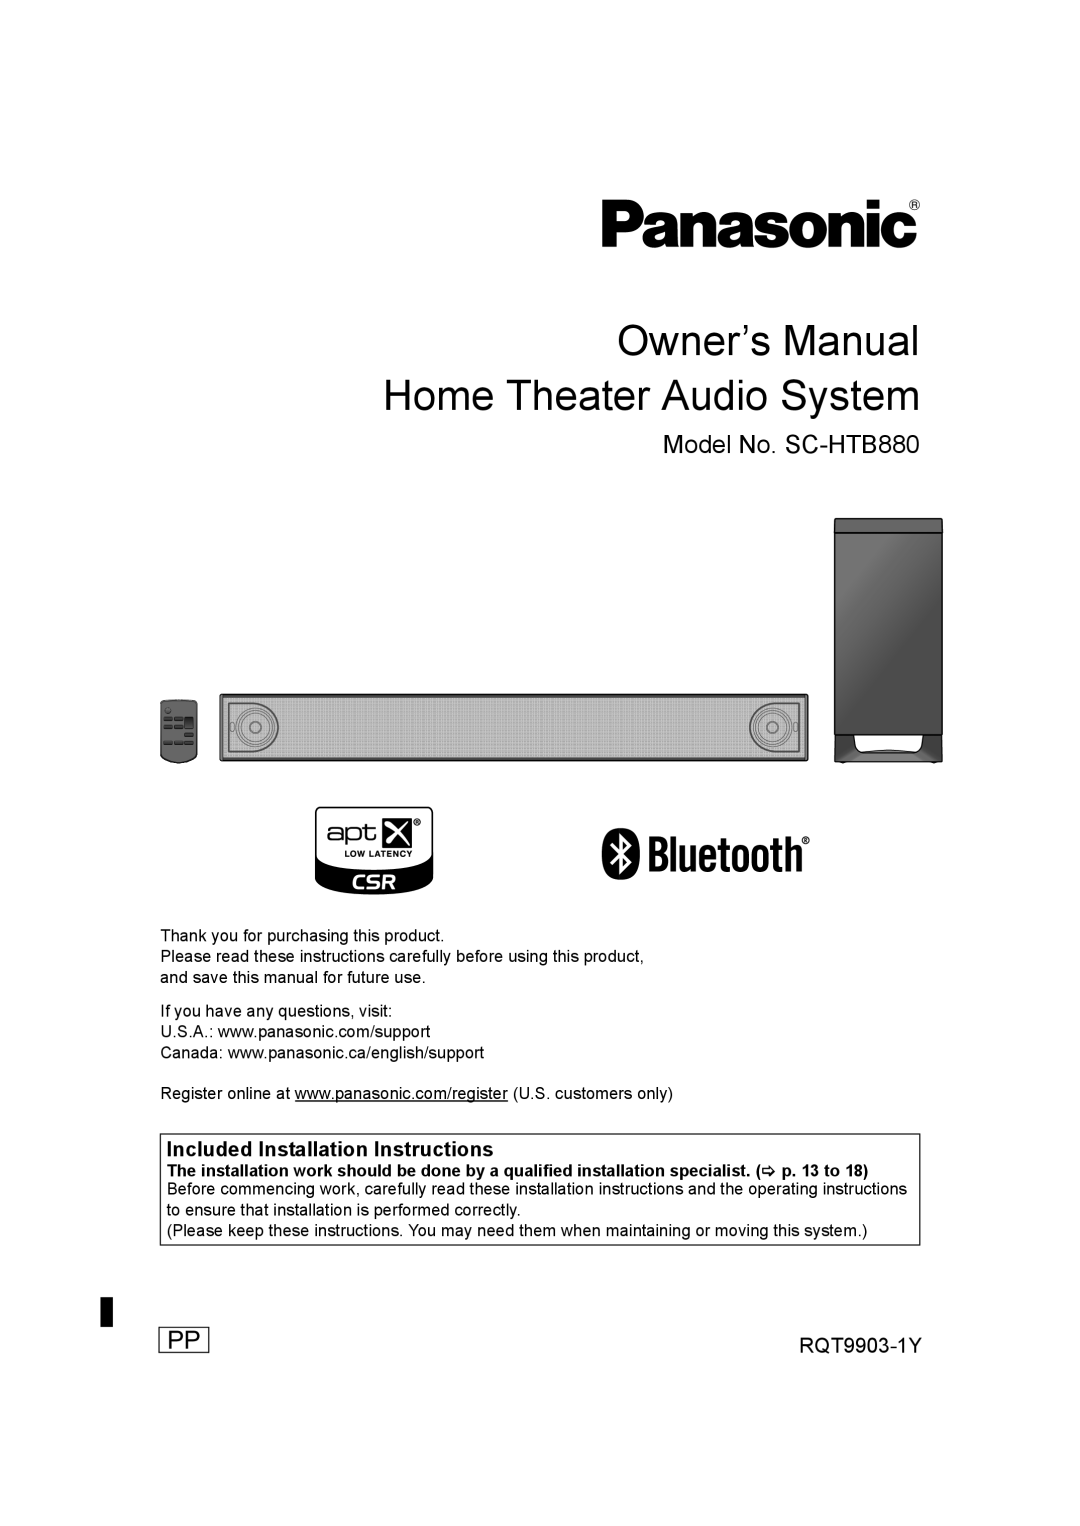 Panasonic SC-THB880 owner manual Home Theater Audio System, Included Installation Instructions 